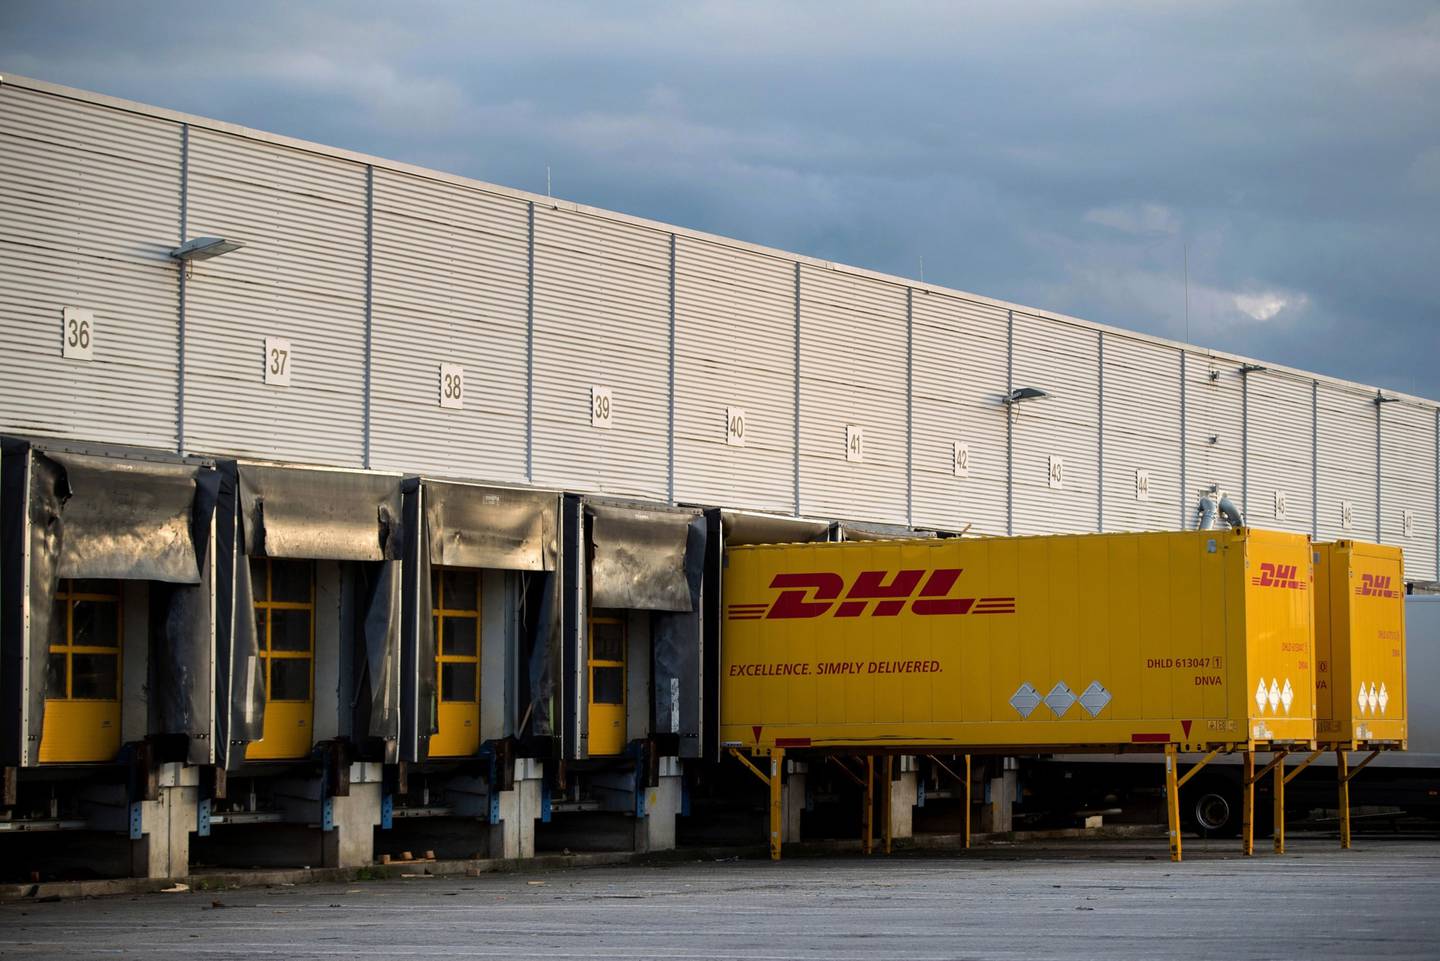 DHL delivery wagons in the loading bay at a Deutsche Post AG sorting office in Berlin, Germany, on Monday, Aug. 2, 2021. Deutsche Post reports first half earnings on Aug. 5.